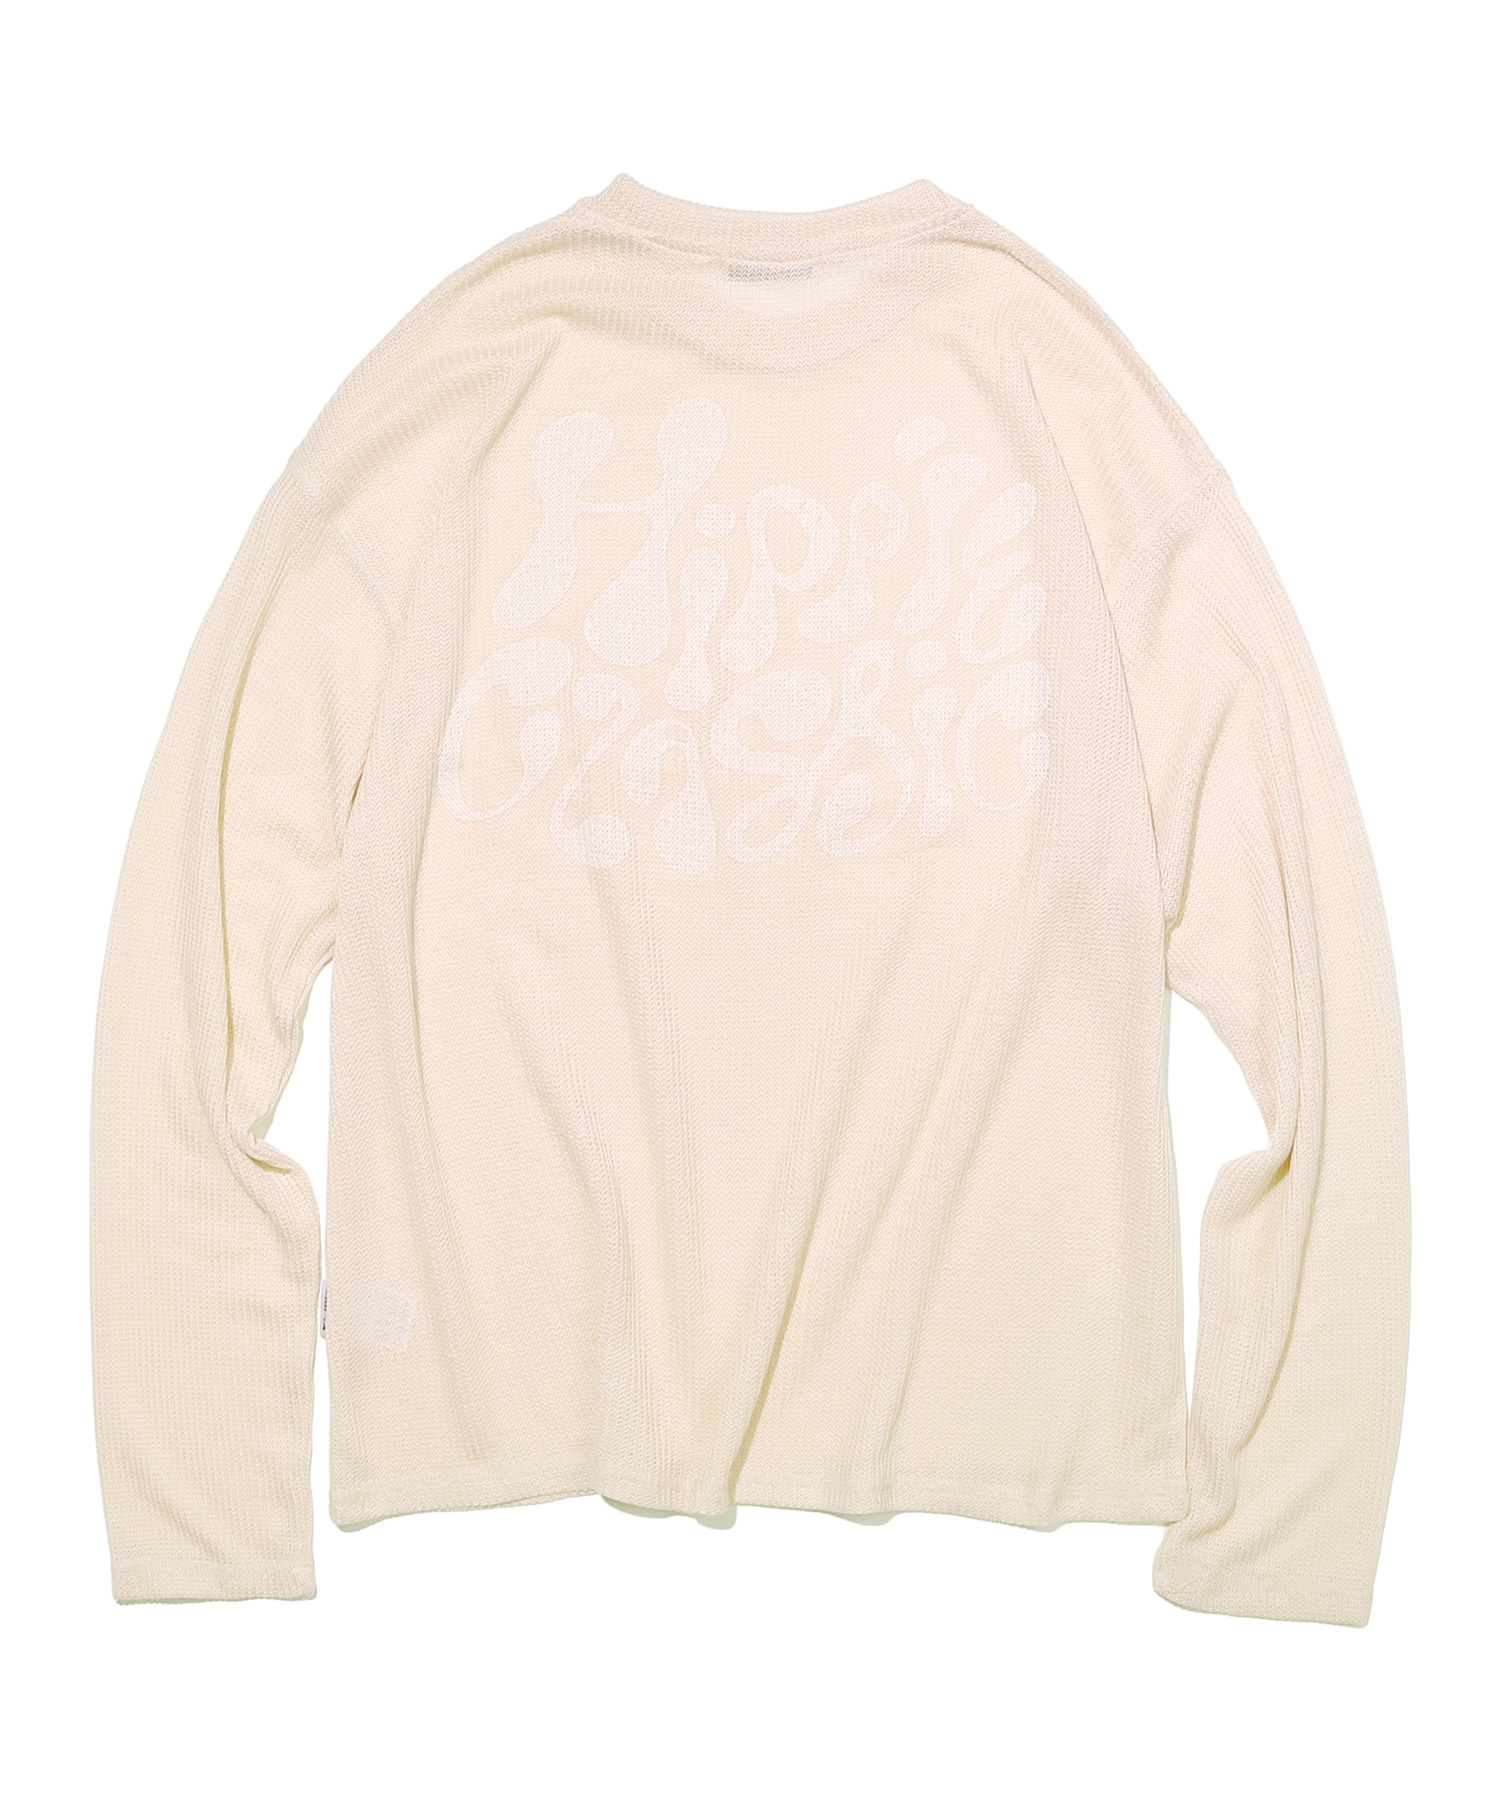 Hippie knit long sleeves  Ivory